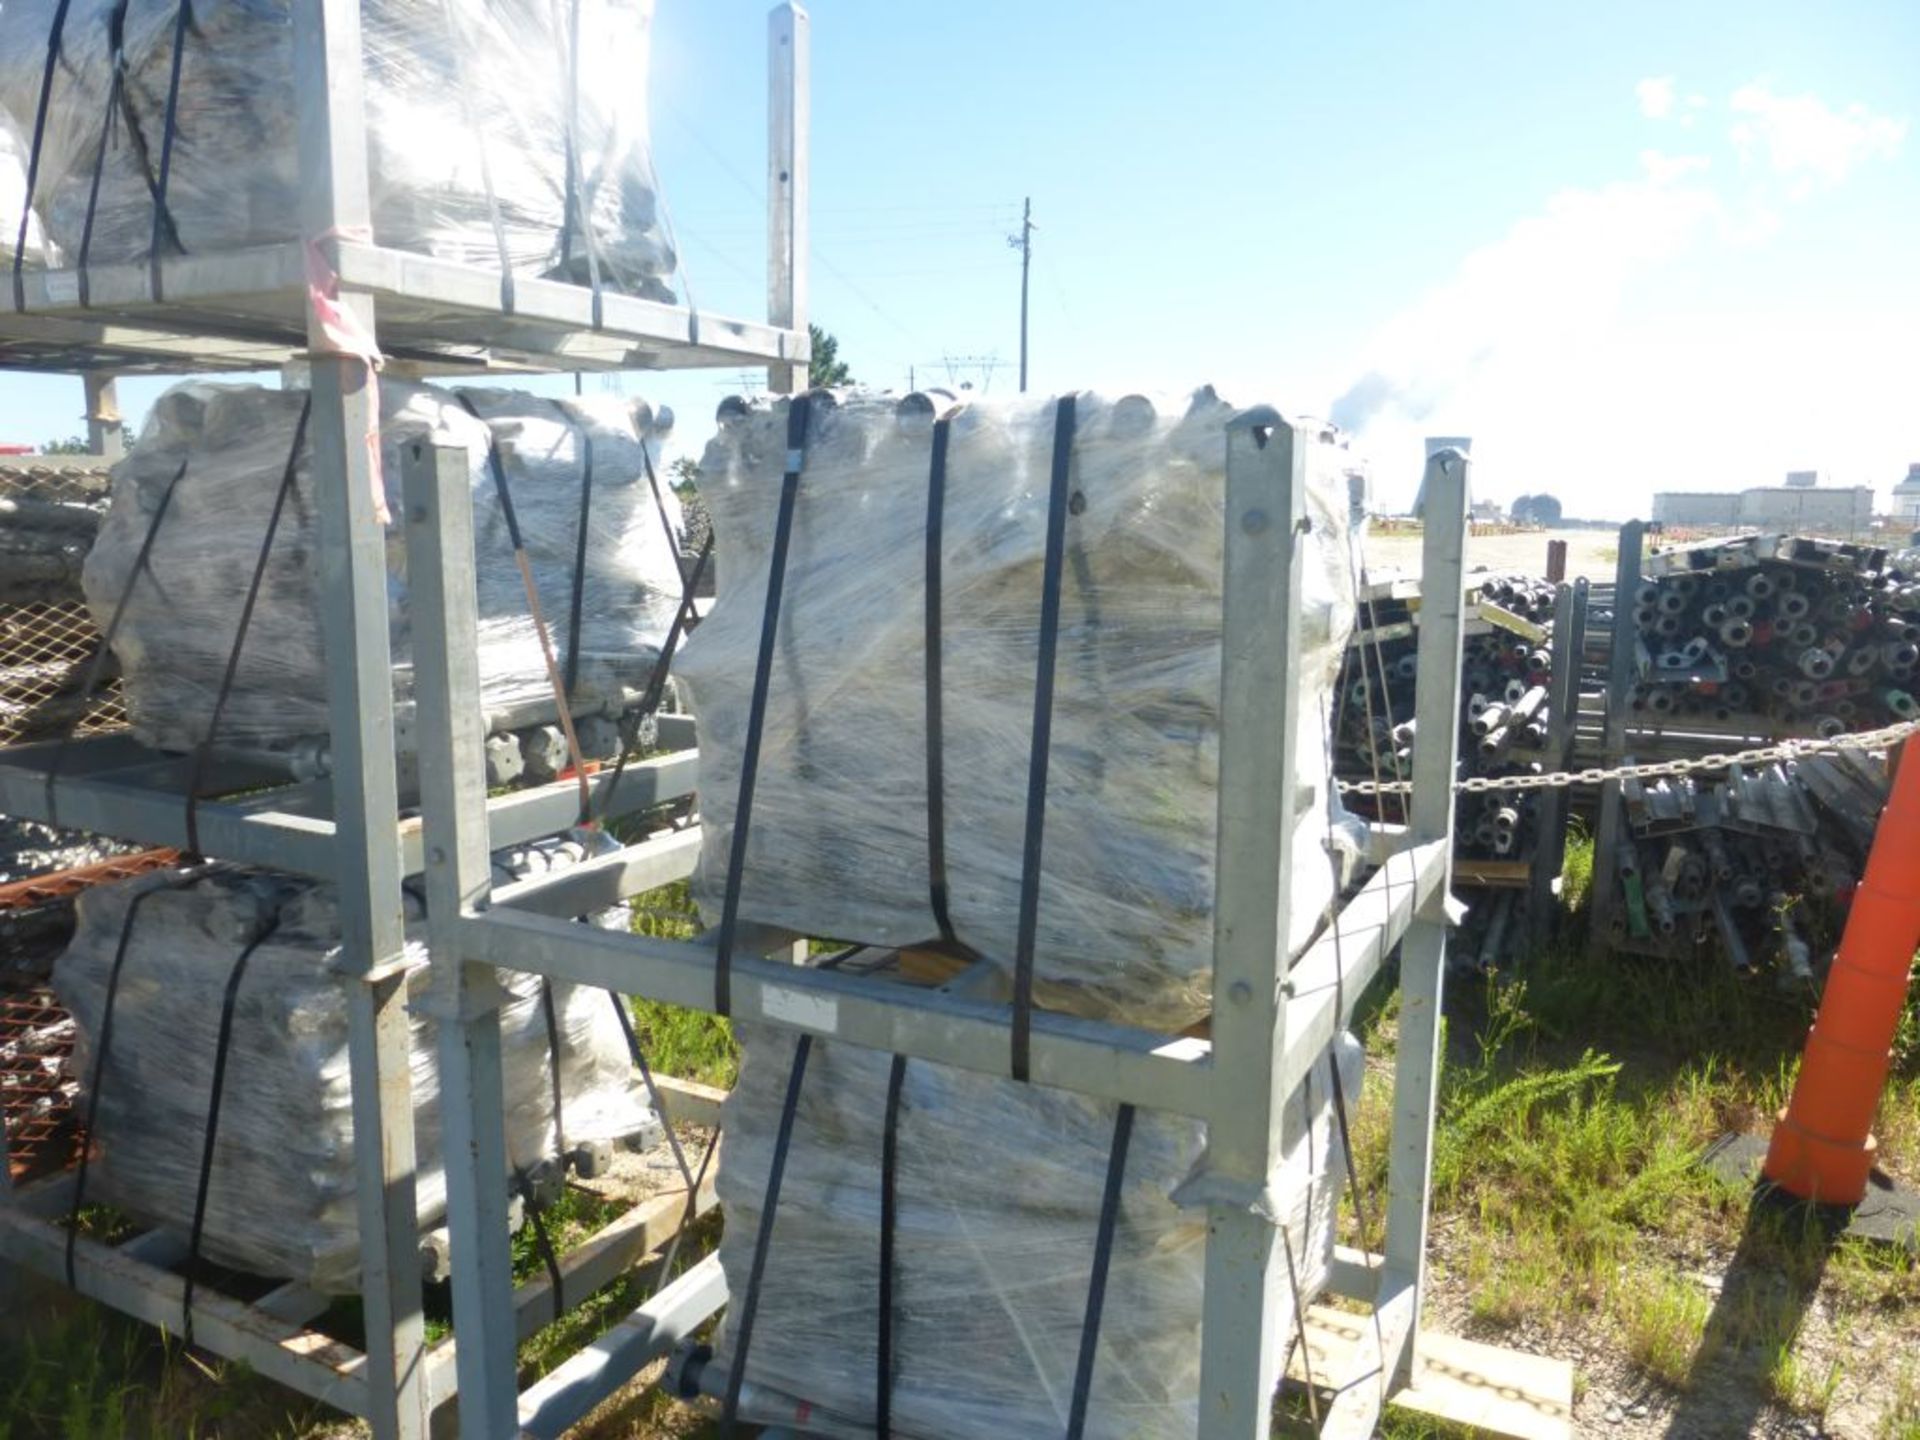 Lot of (250) 25" Deck Adapter - Type: CLDA - (1) Racks Per Lot - Approximate Weight: 3,000 Lbs; Tag: - Image 2 of 3